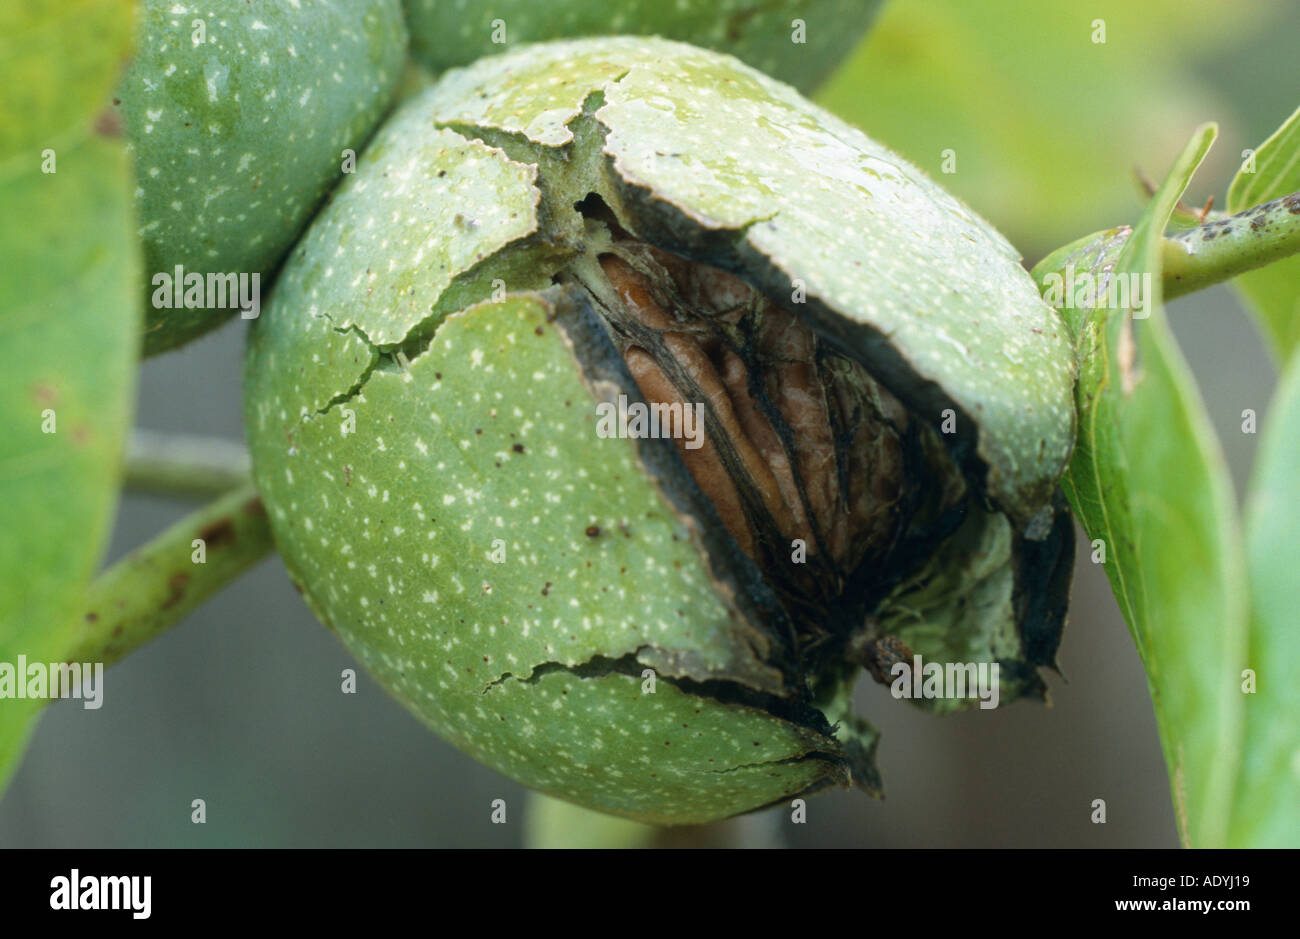 walnut (Juglans regia), green outer layers of fruits dehiscing. Stock Photo